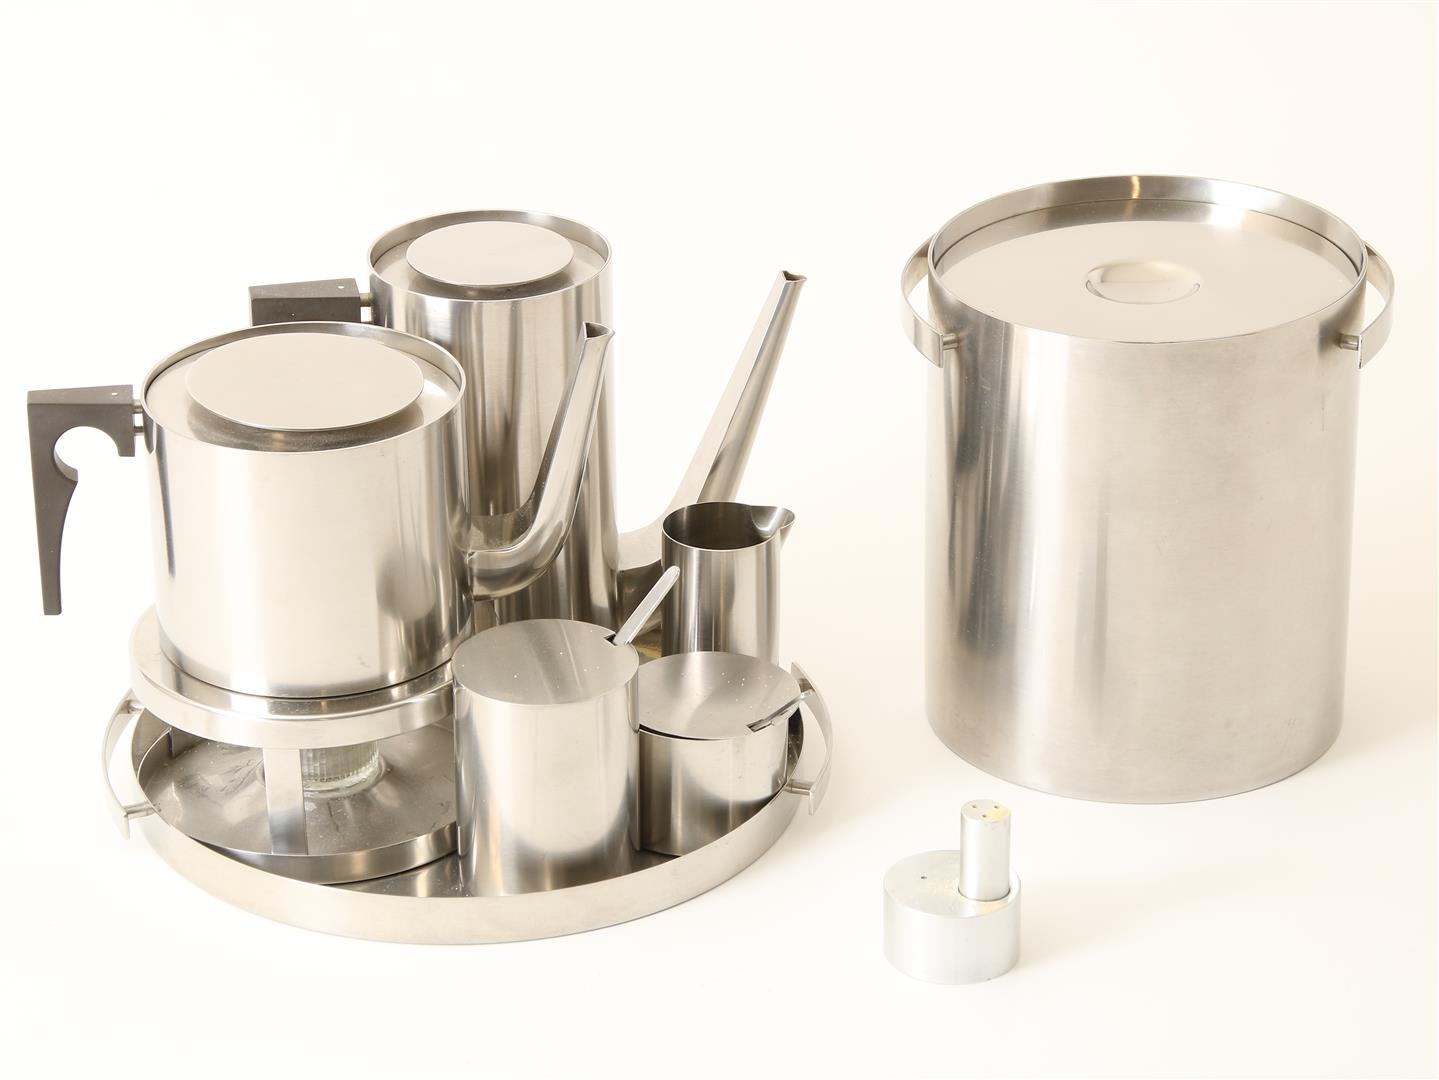 9-piece stainless steel tea and coffee set, including champagne cooler, salt and pepper holder and - Image 2 of 3